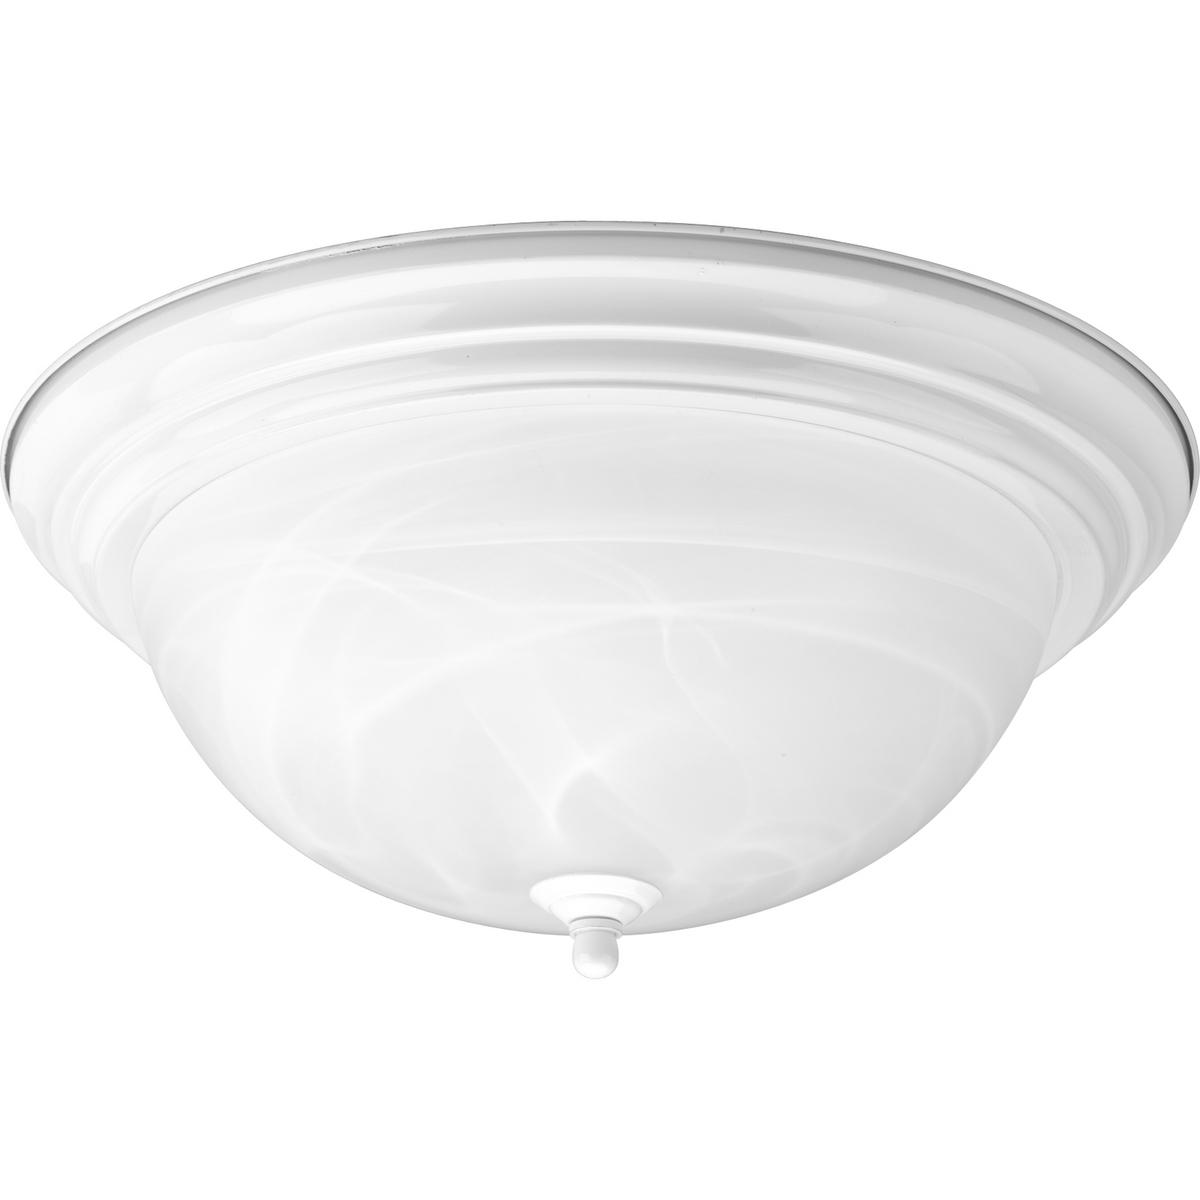 Hubbell P3926-30 Three-light flush mount with dome shaped alabaster glass, solid trim and decorative knobs. Center lock-up with matching finial. White finish.  ; White finish. ; Alabaster Glass. ; Decorative details.